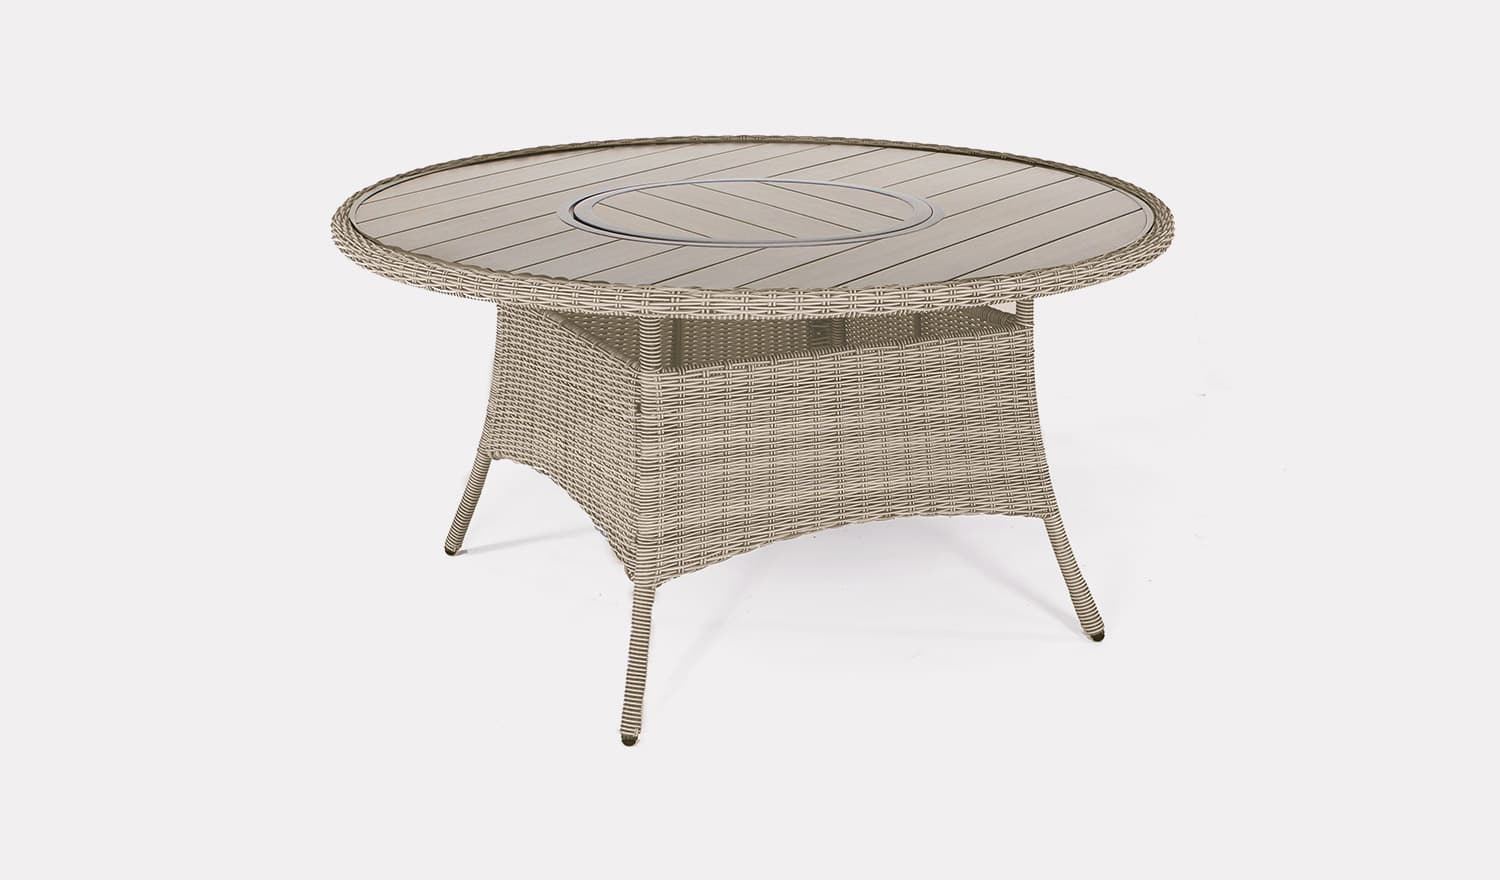 KETTLER Kettler Palma GARDEN table ONLY with furniture cover worth £440 new. 